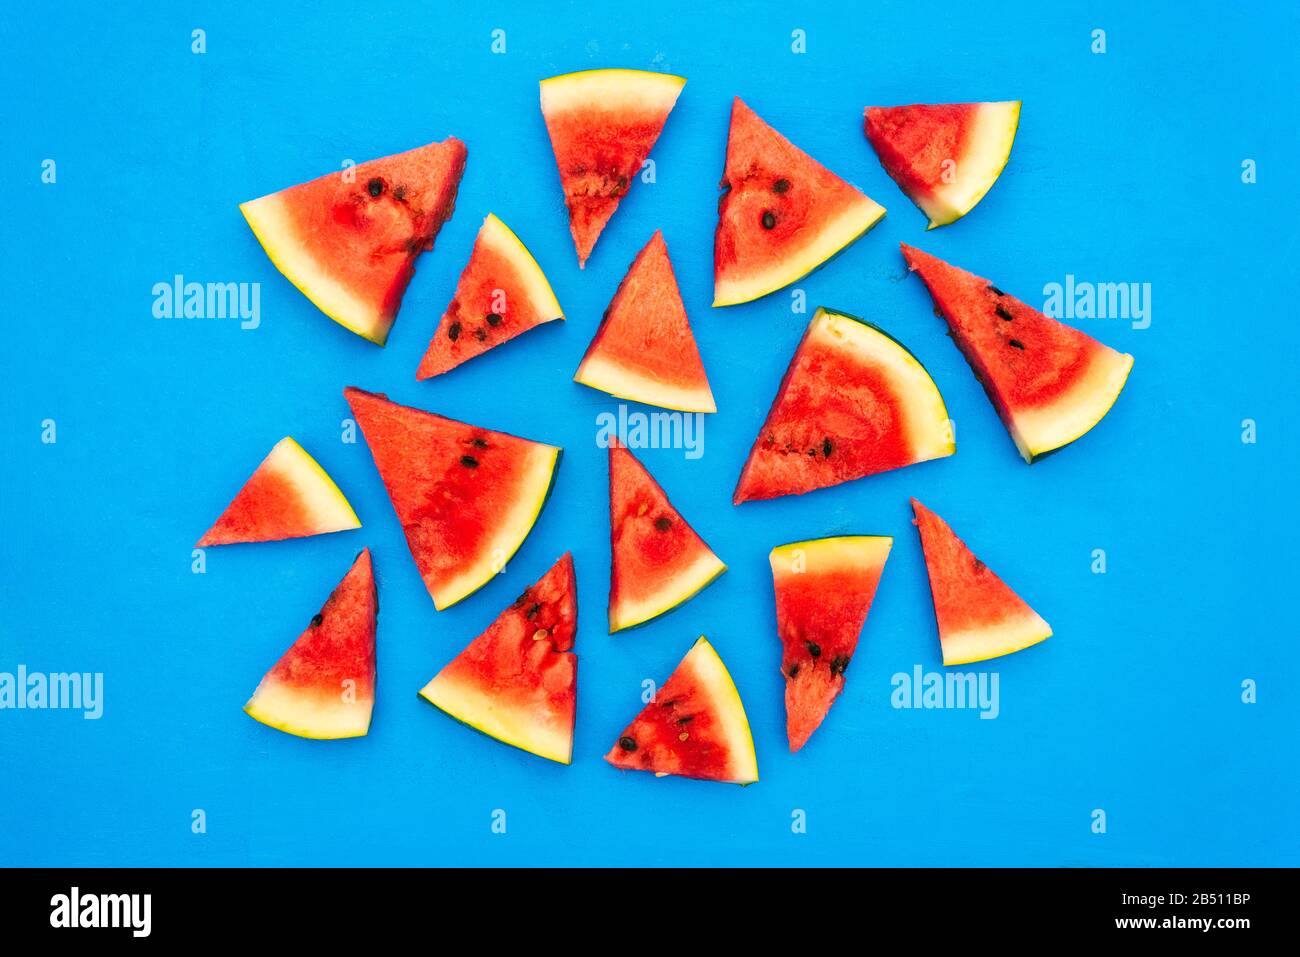 Watermelon slices on a blue canvas. Fresh juicy slices of watermelon. Sweet summer dessert on a bright background Stock Photo